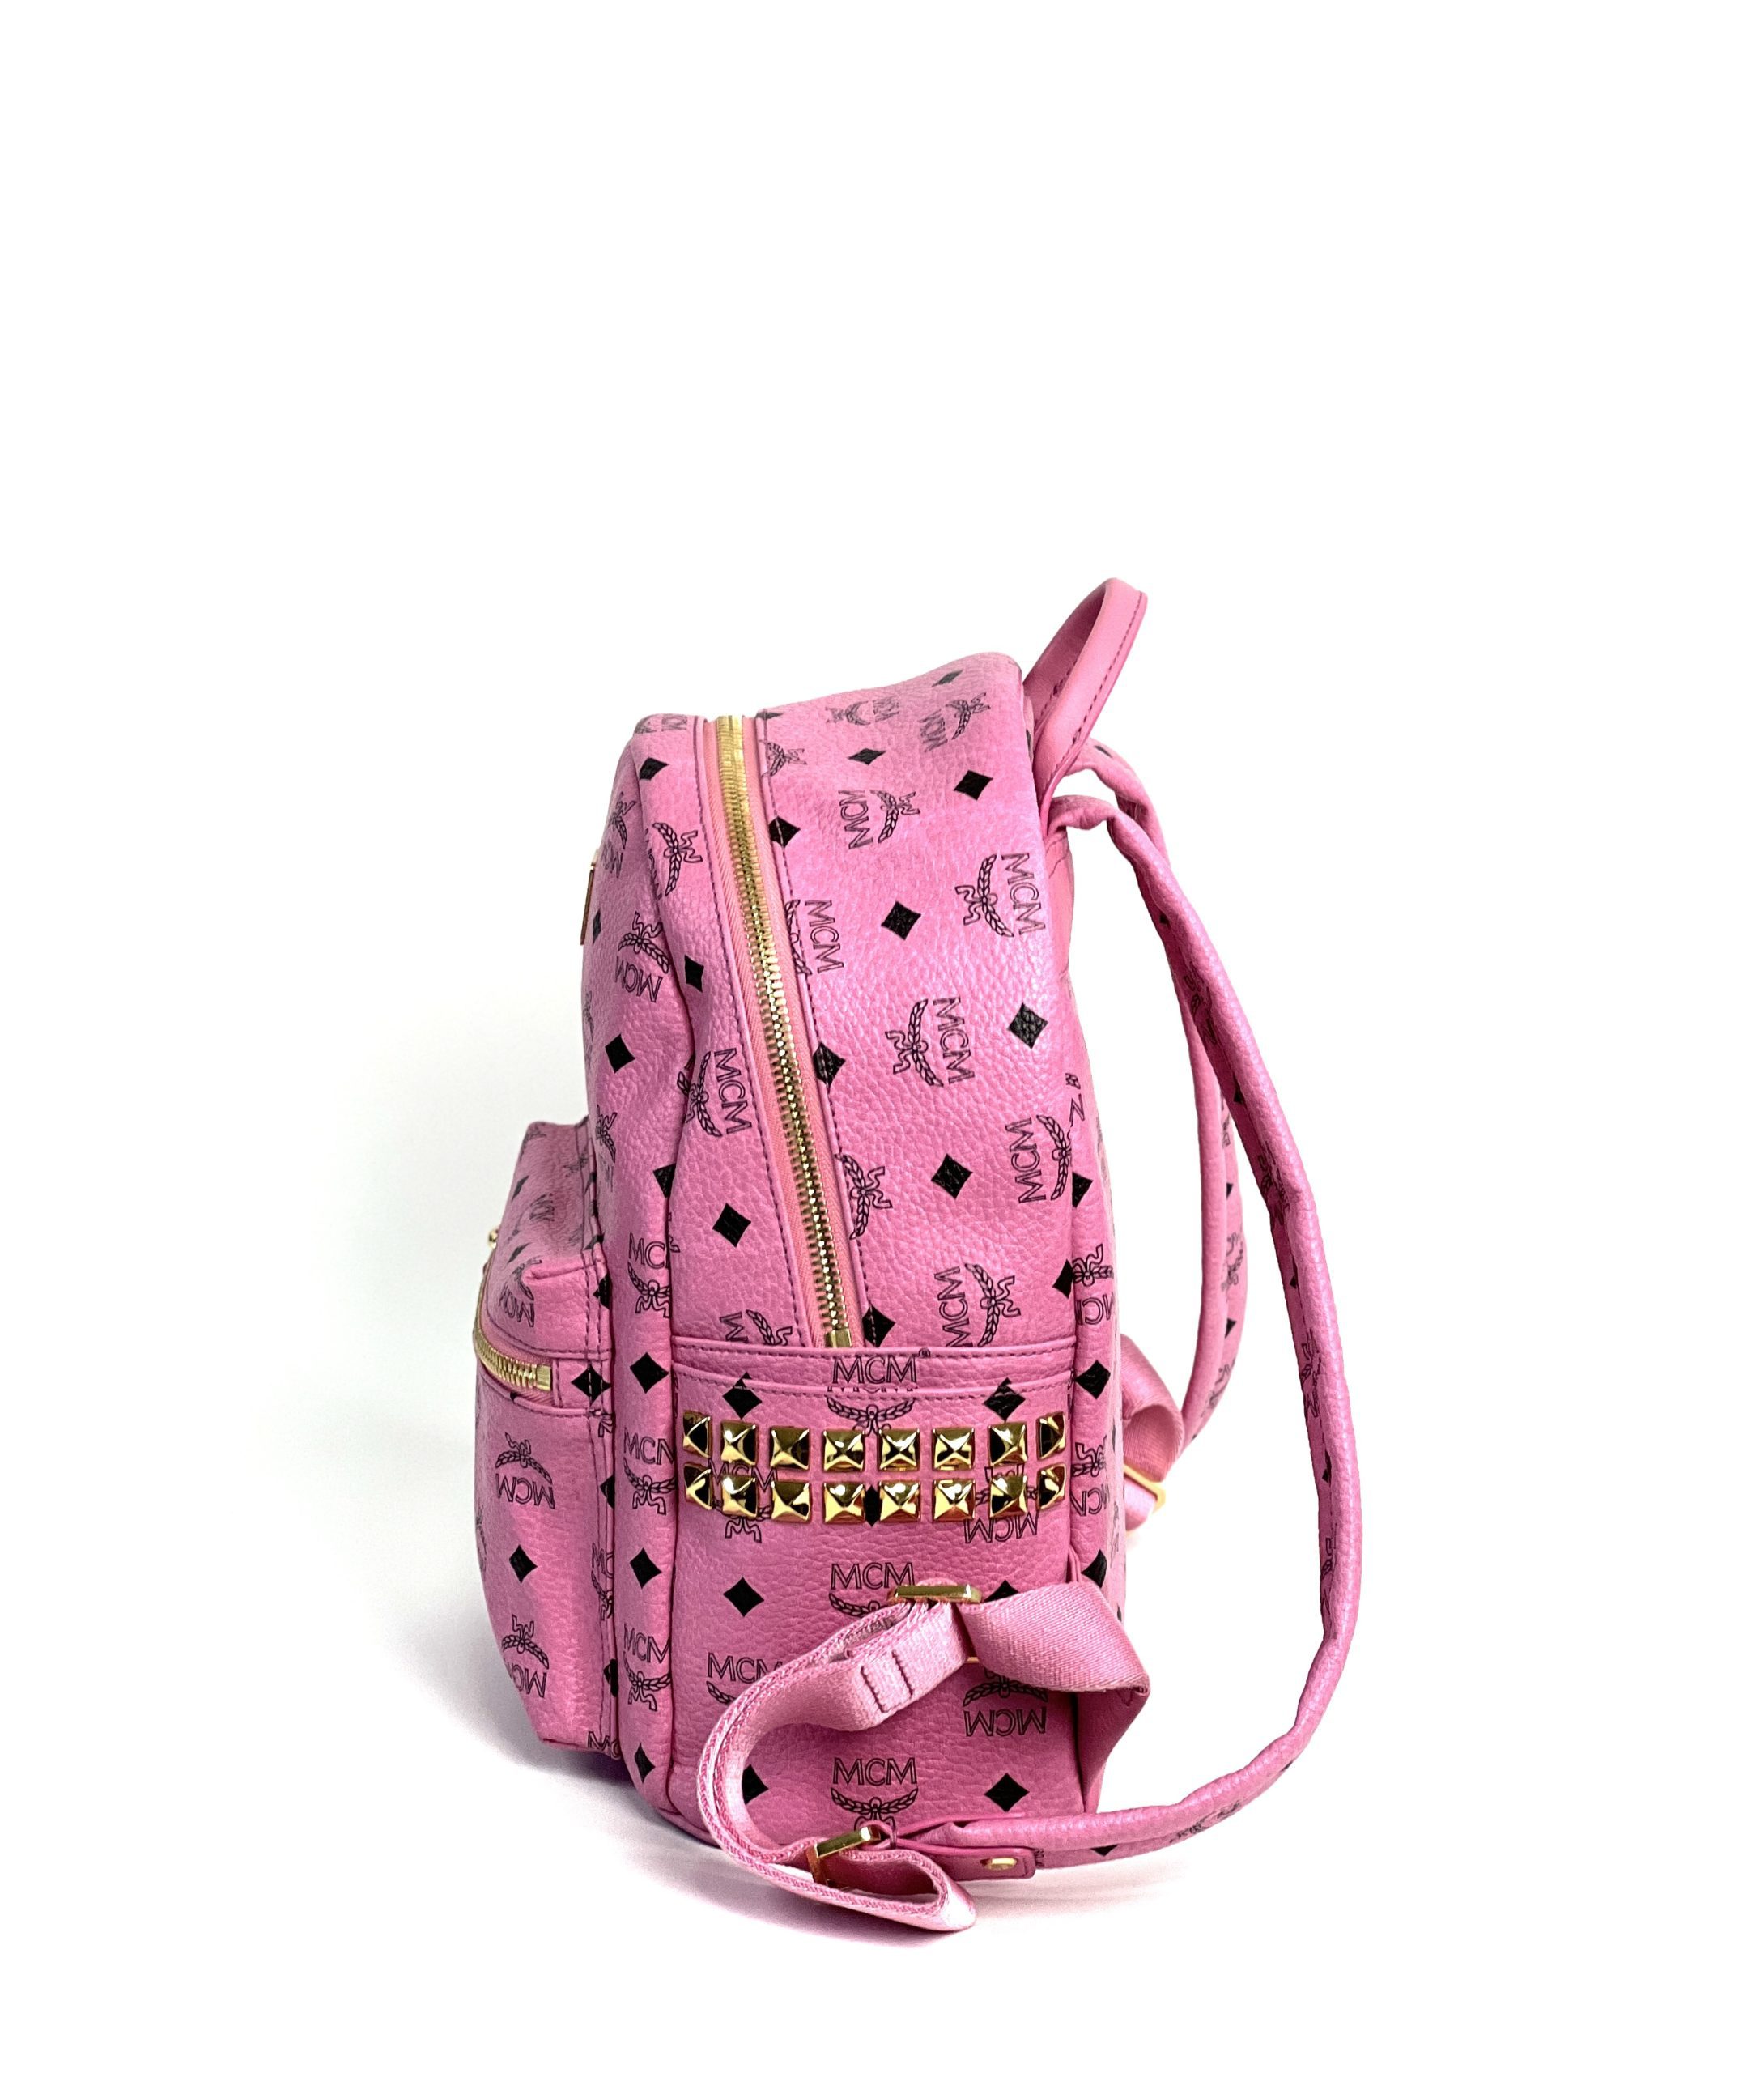 mcm pink backpack with spikes BRAND NEW w/dust bag